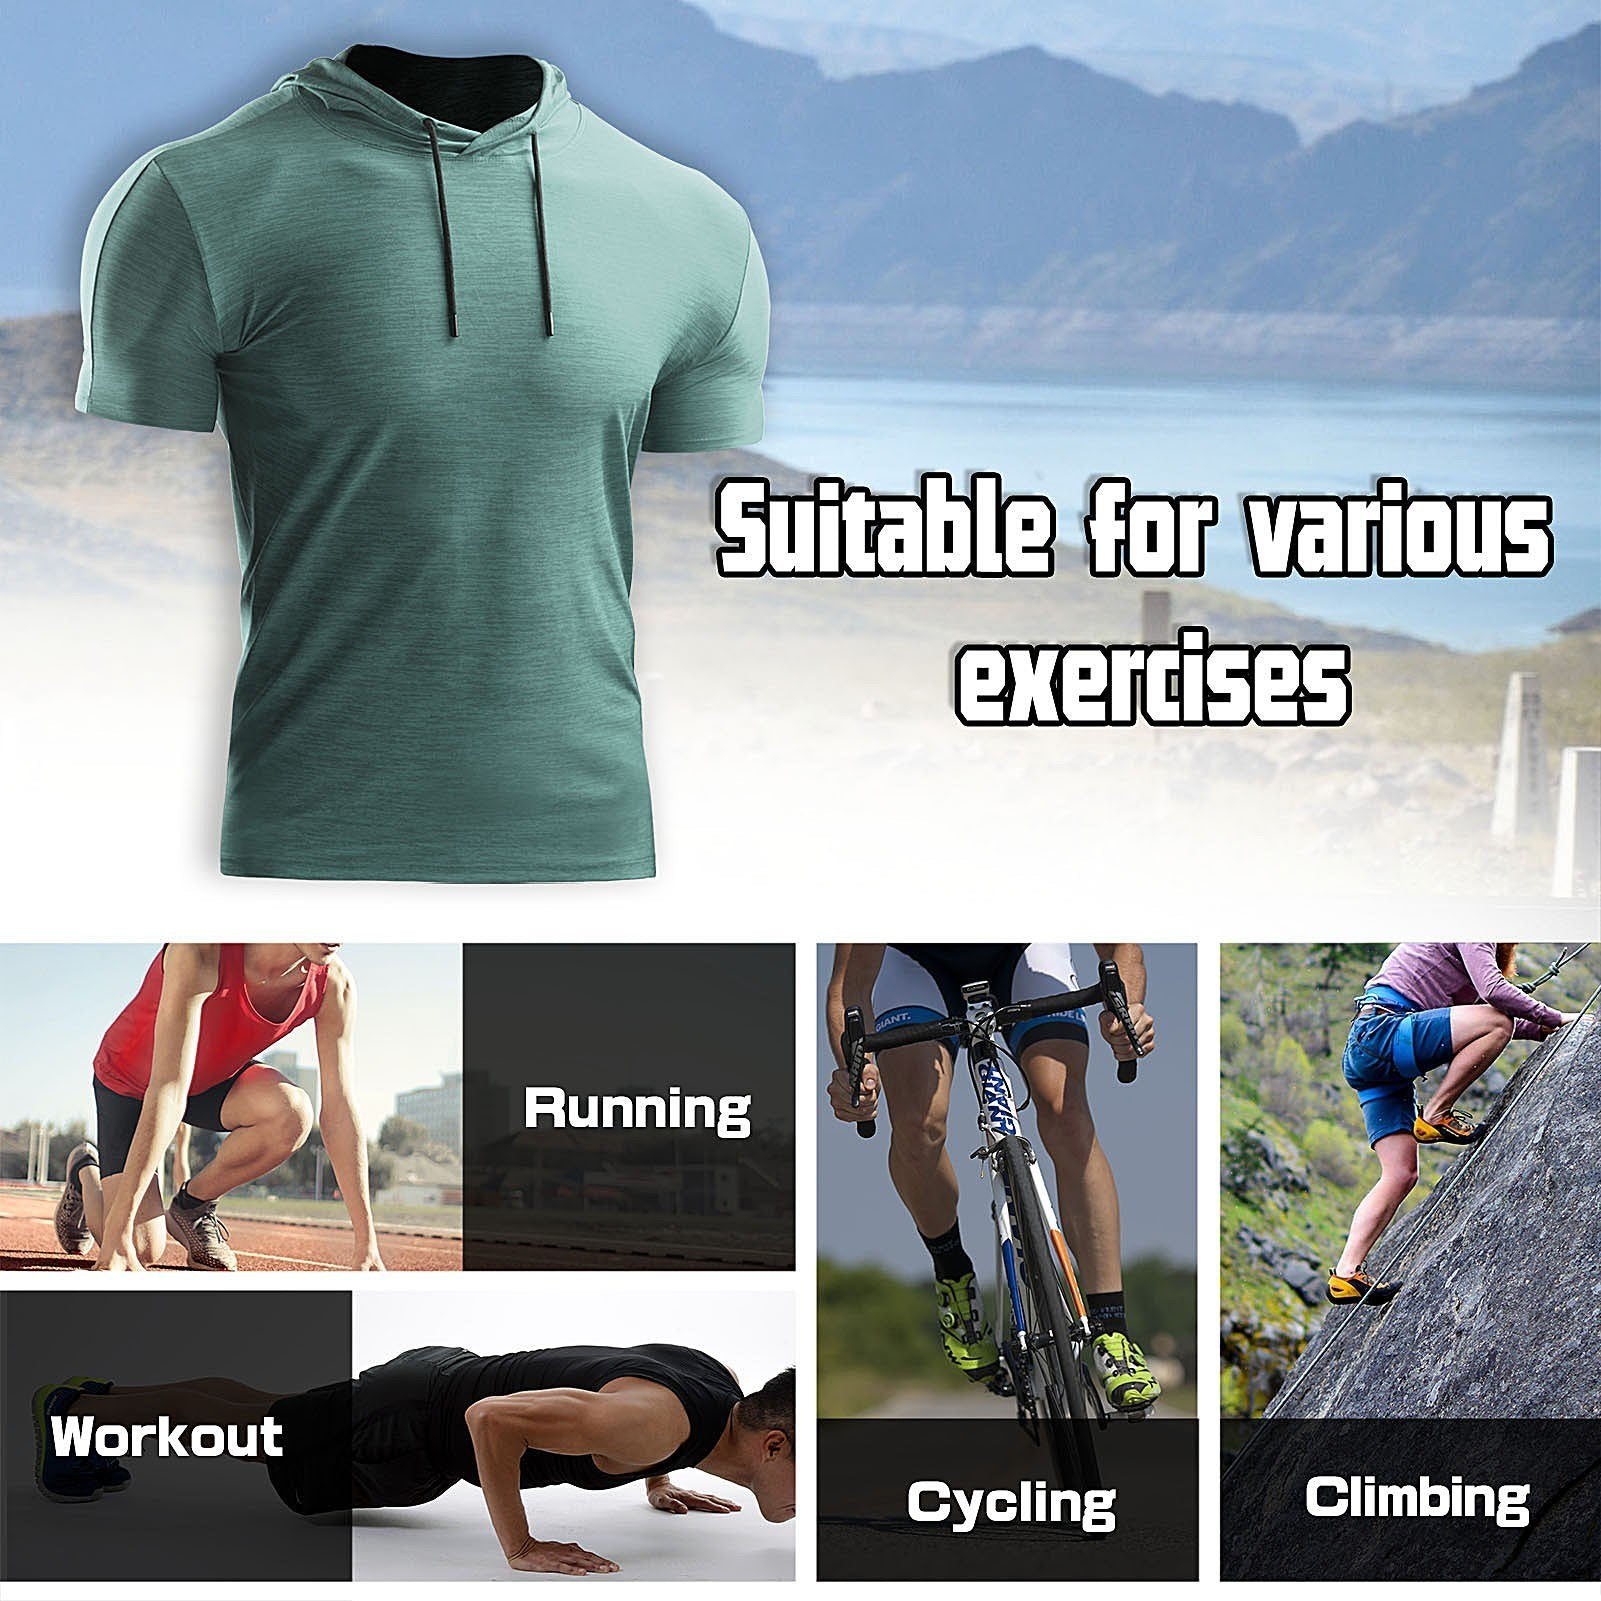 2PCS Men Summer Sports T-Shirt Solid Color Hooded Short Sleeve Quick-Dry Running Gym Sportswear